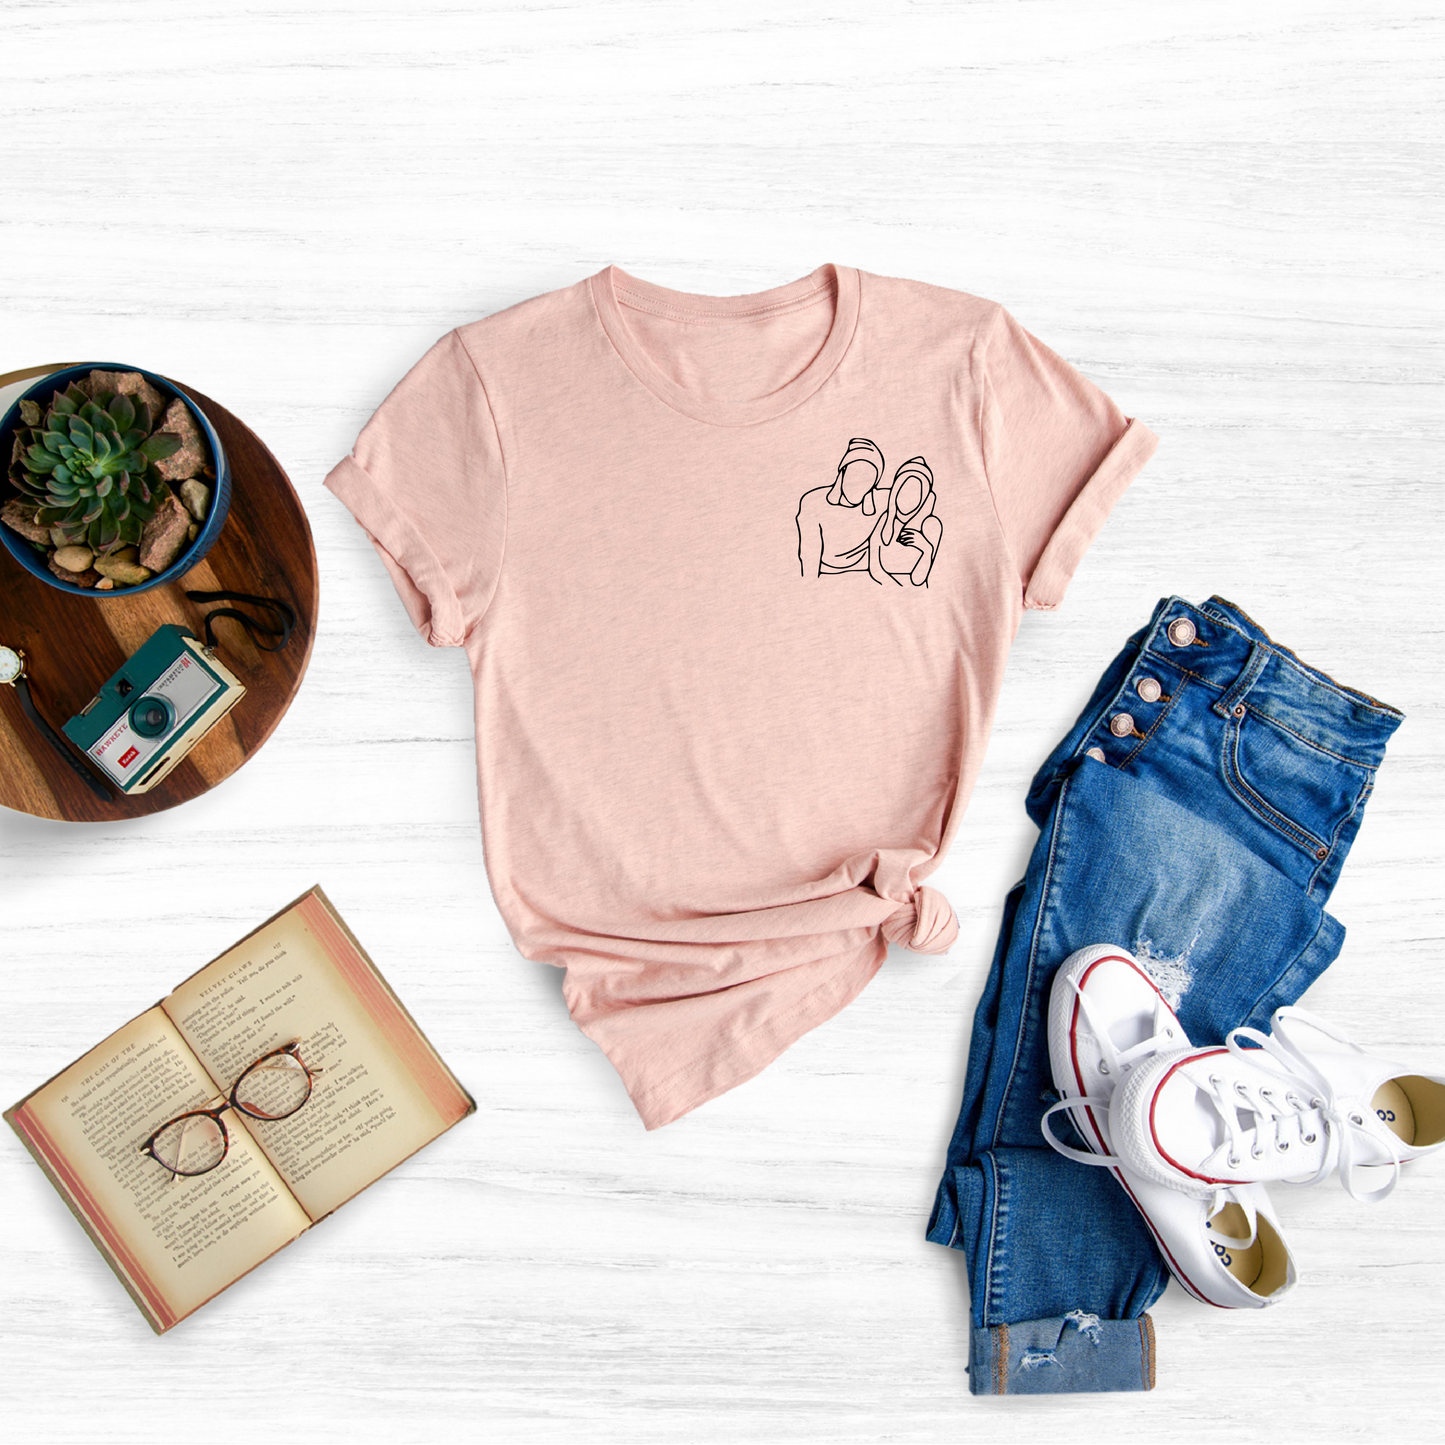 Capture and cherish your precious memories with our one-of-a-kind Custom Portrait Embroidered Photo T-shirt or Sweatshirt, the perfect gift for Valentine's Day or any special occasion.